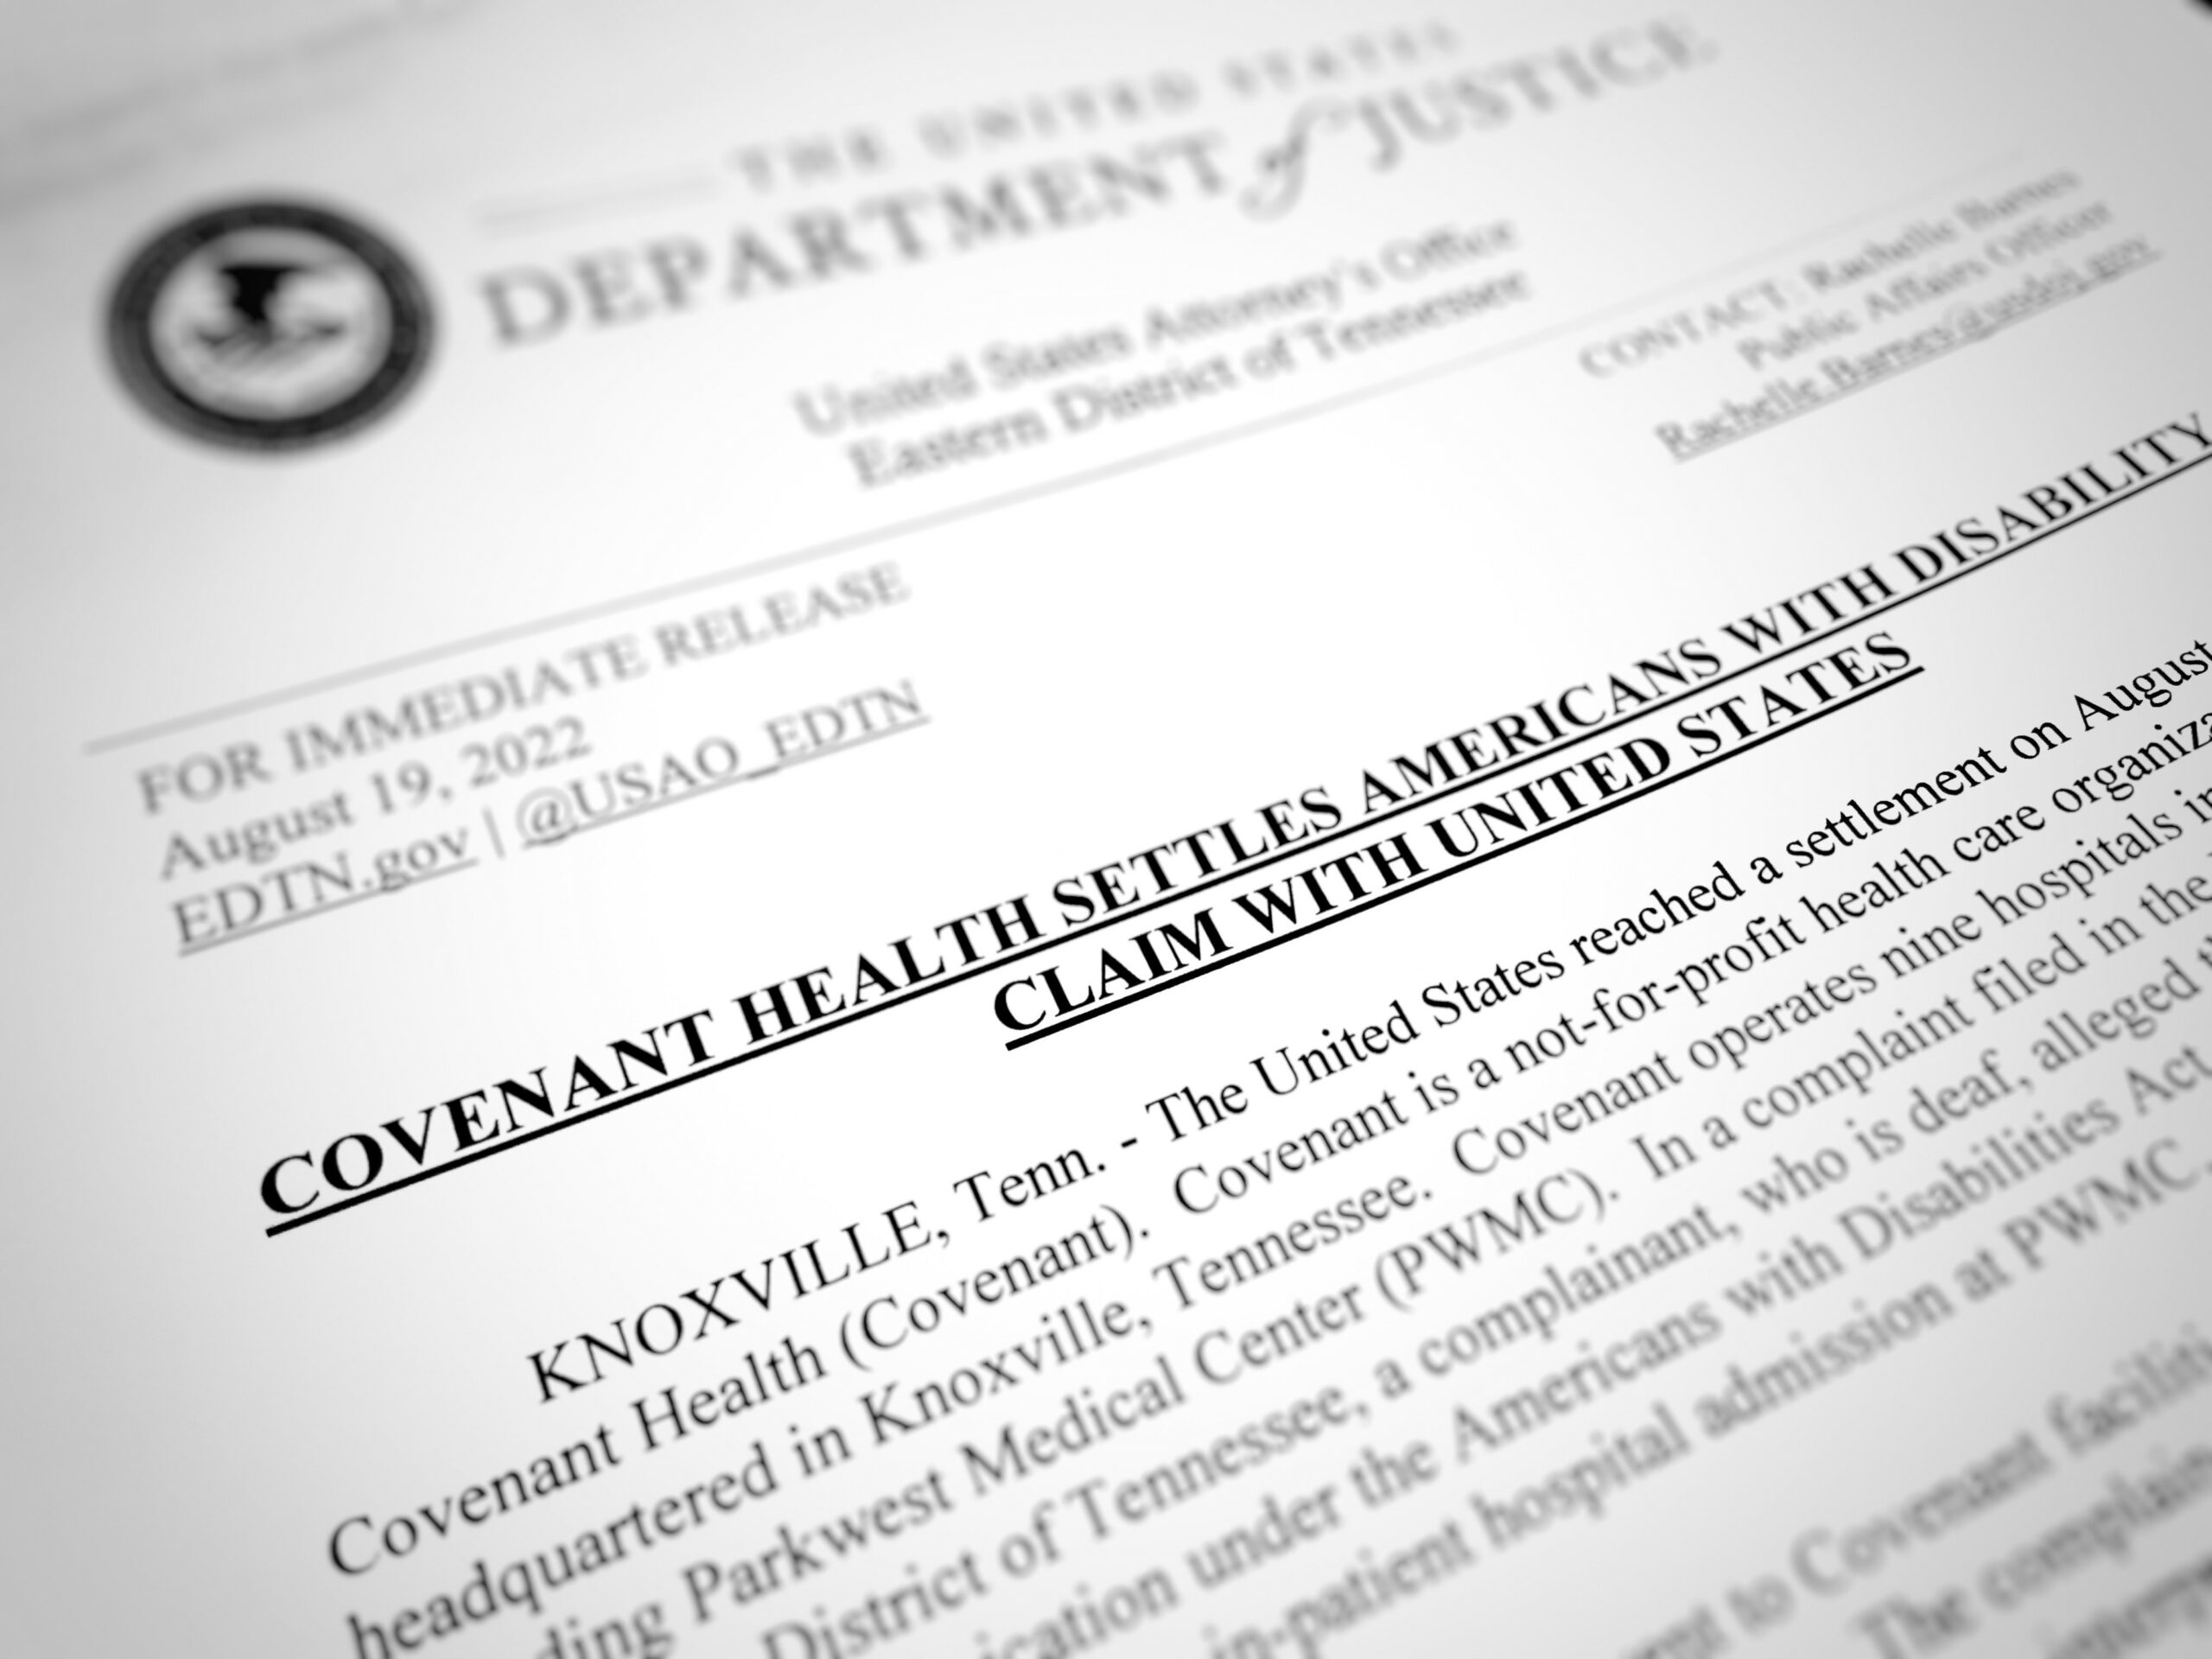 Covenant Health settles Americans with Disabilities Act claims with the United States